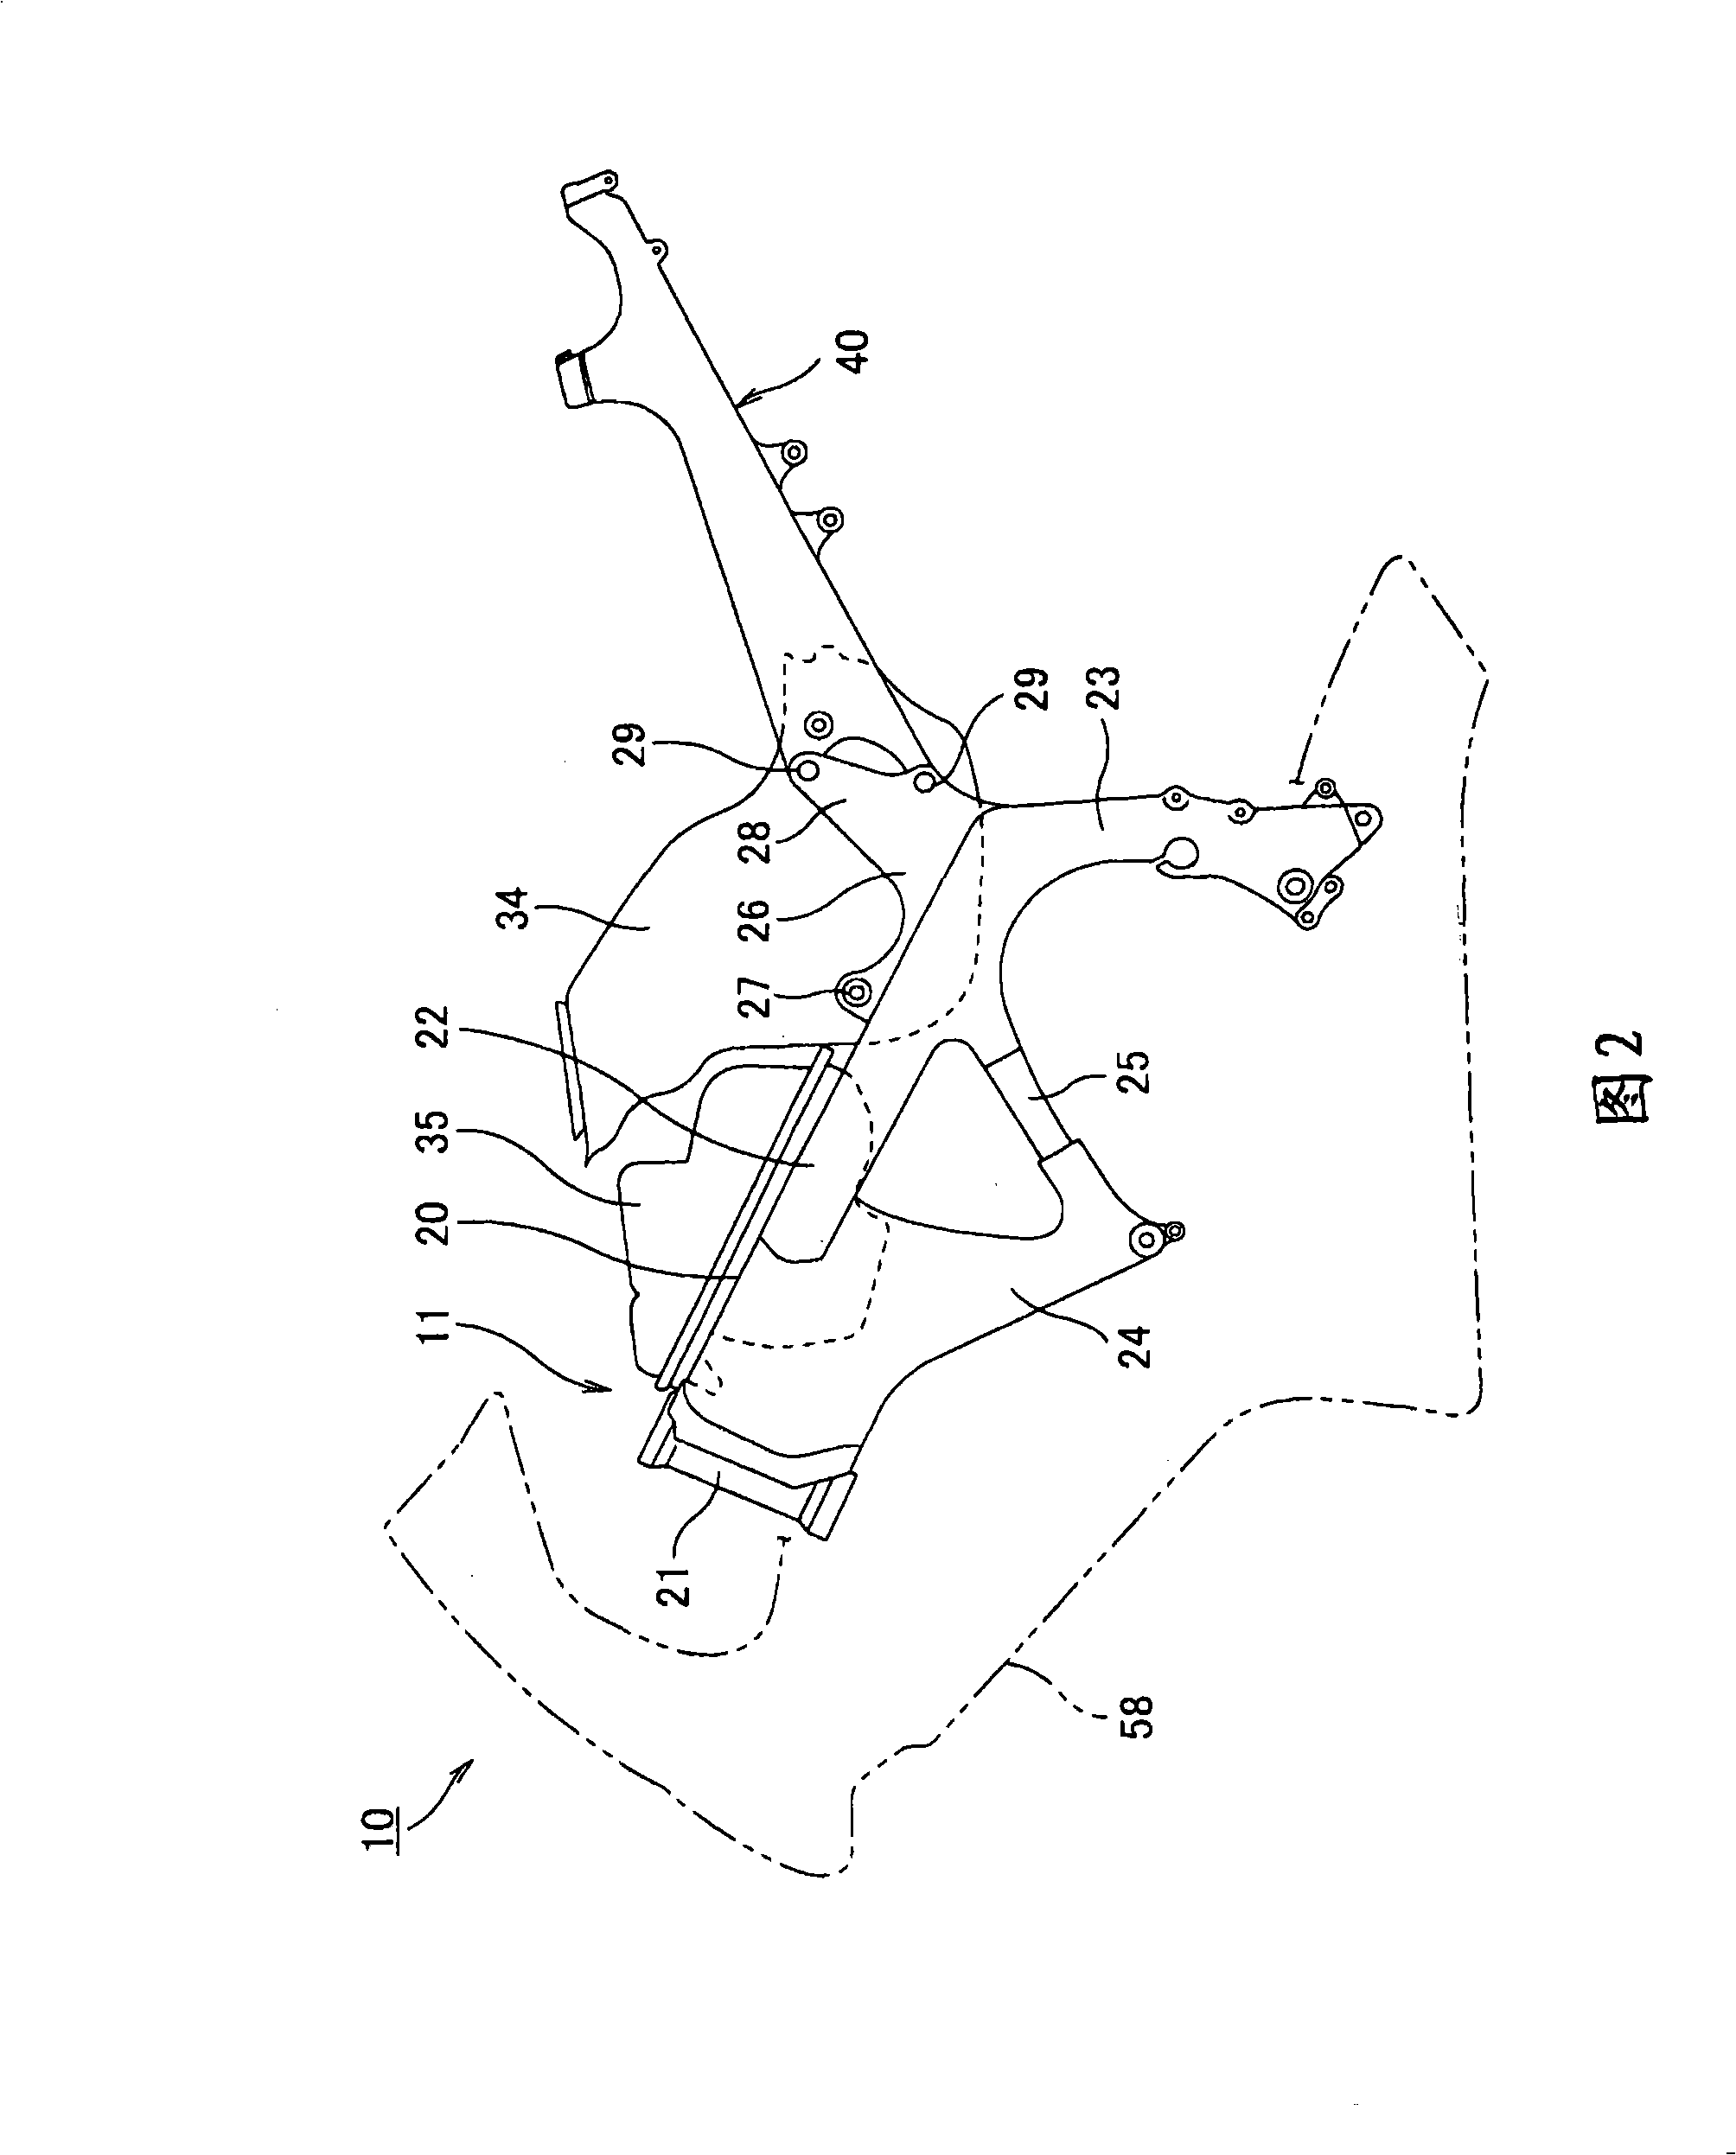 Seat rail structure of motorcycle